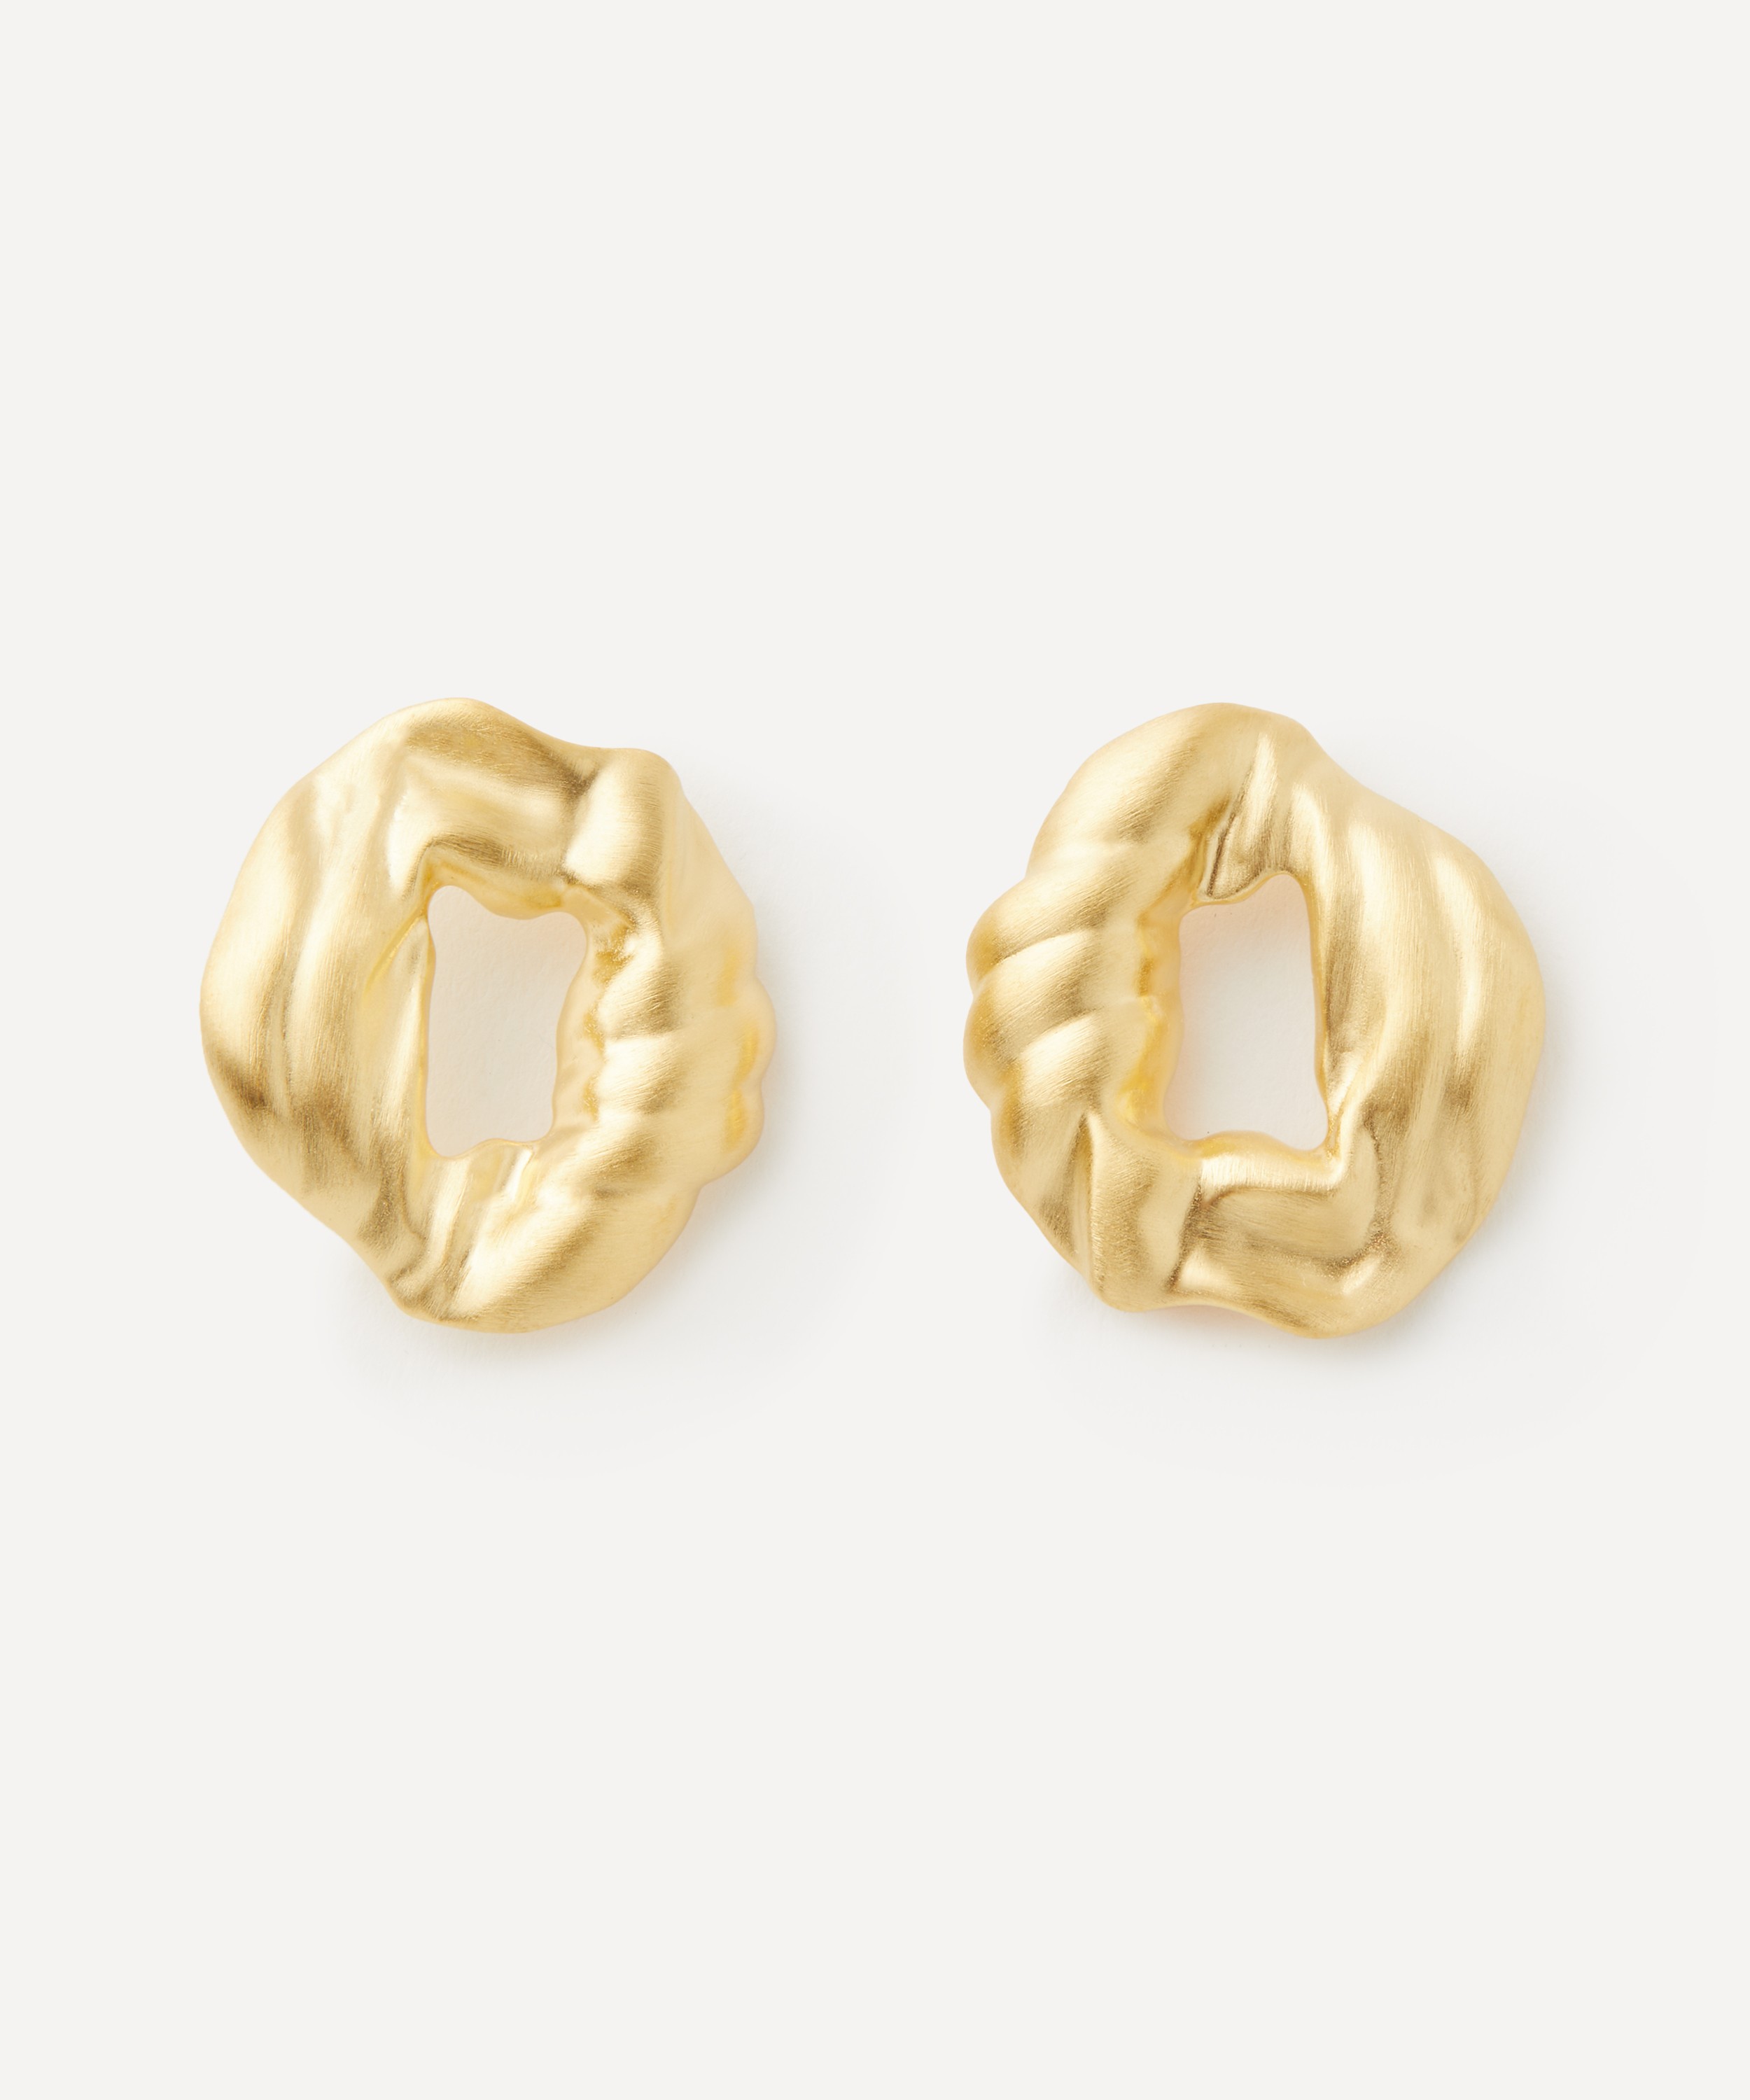 Completedworks - 18ct Gold-Plated Crumpled Stud Earrings